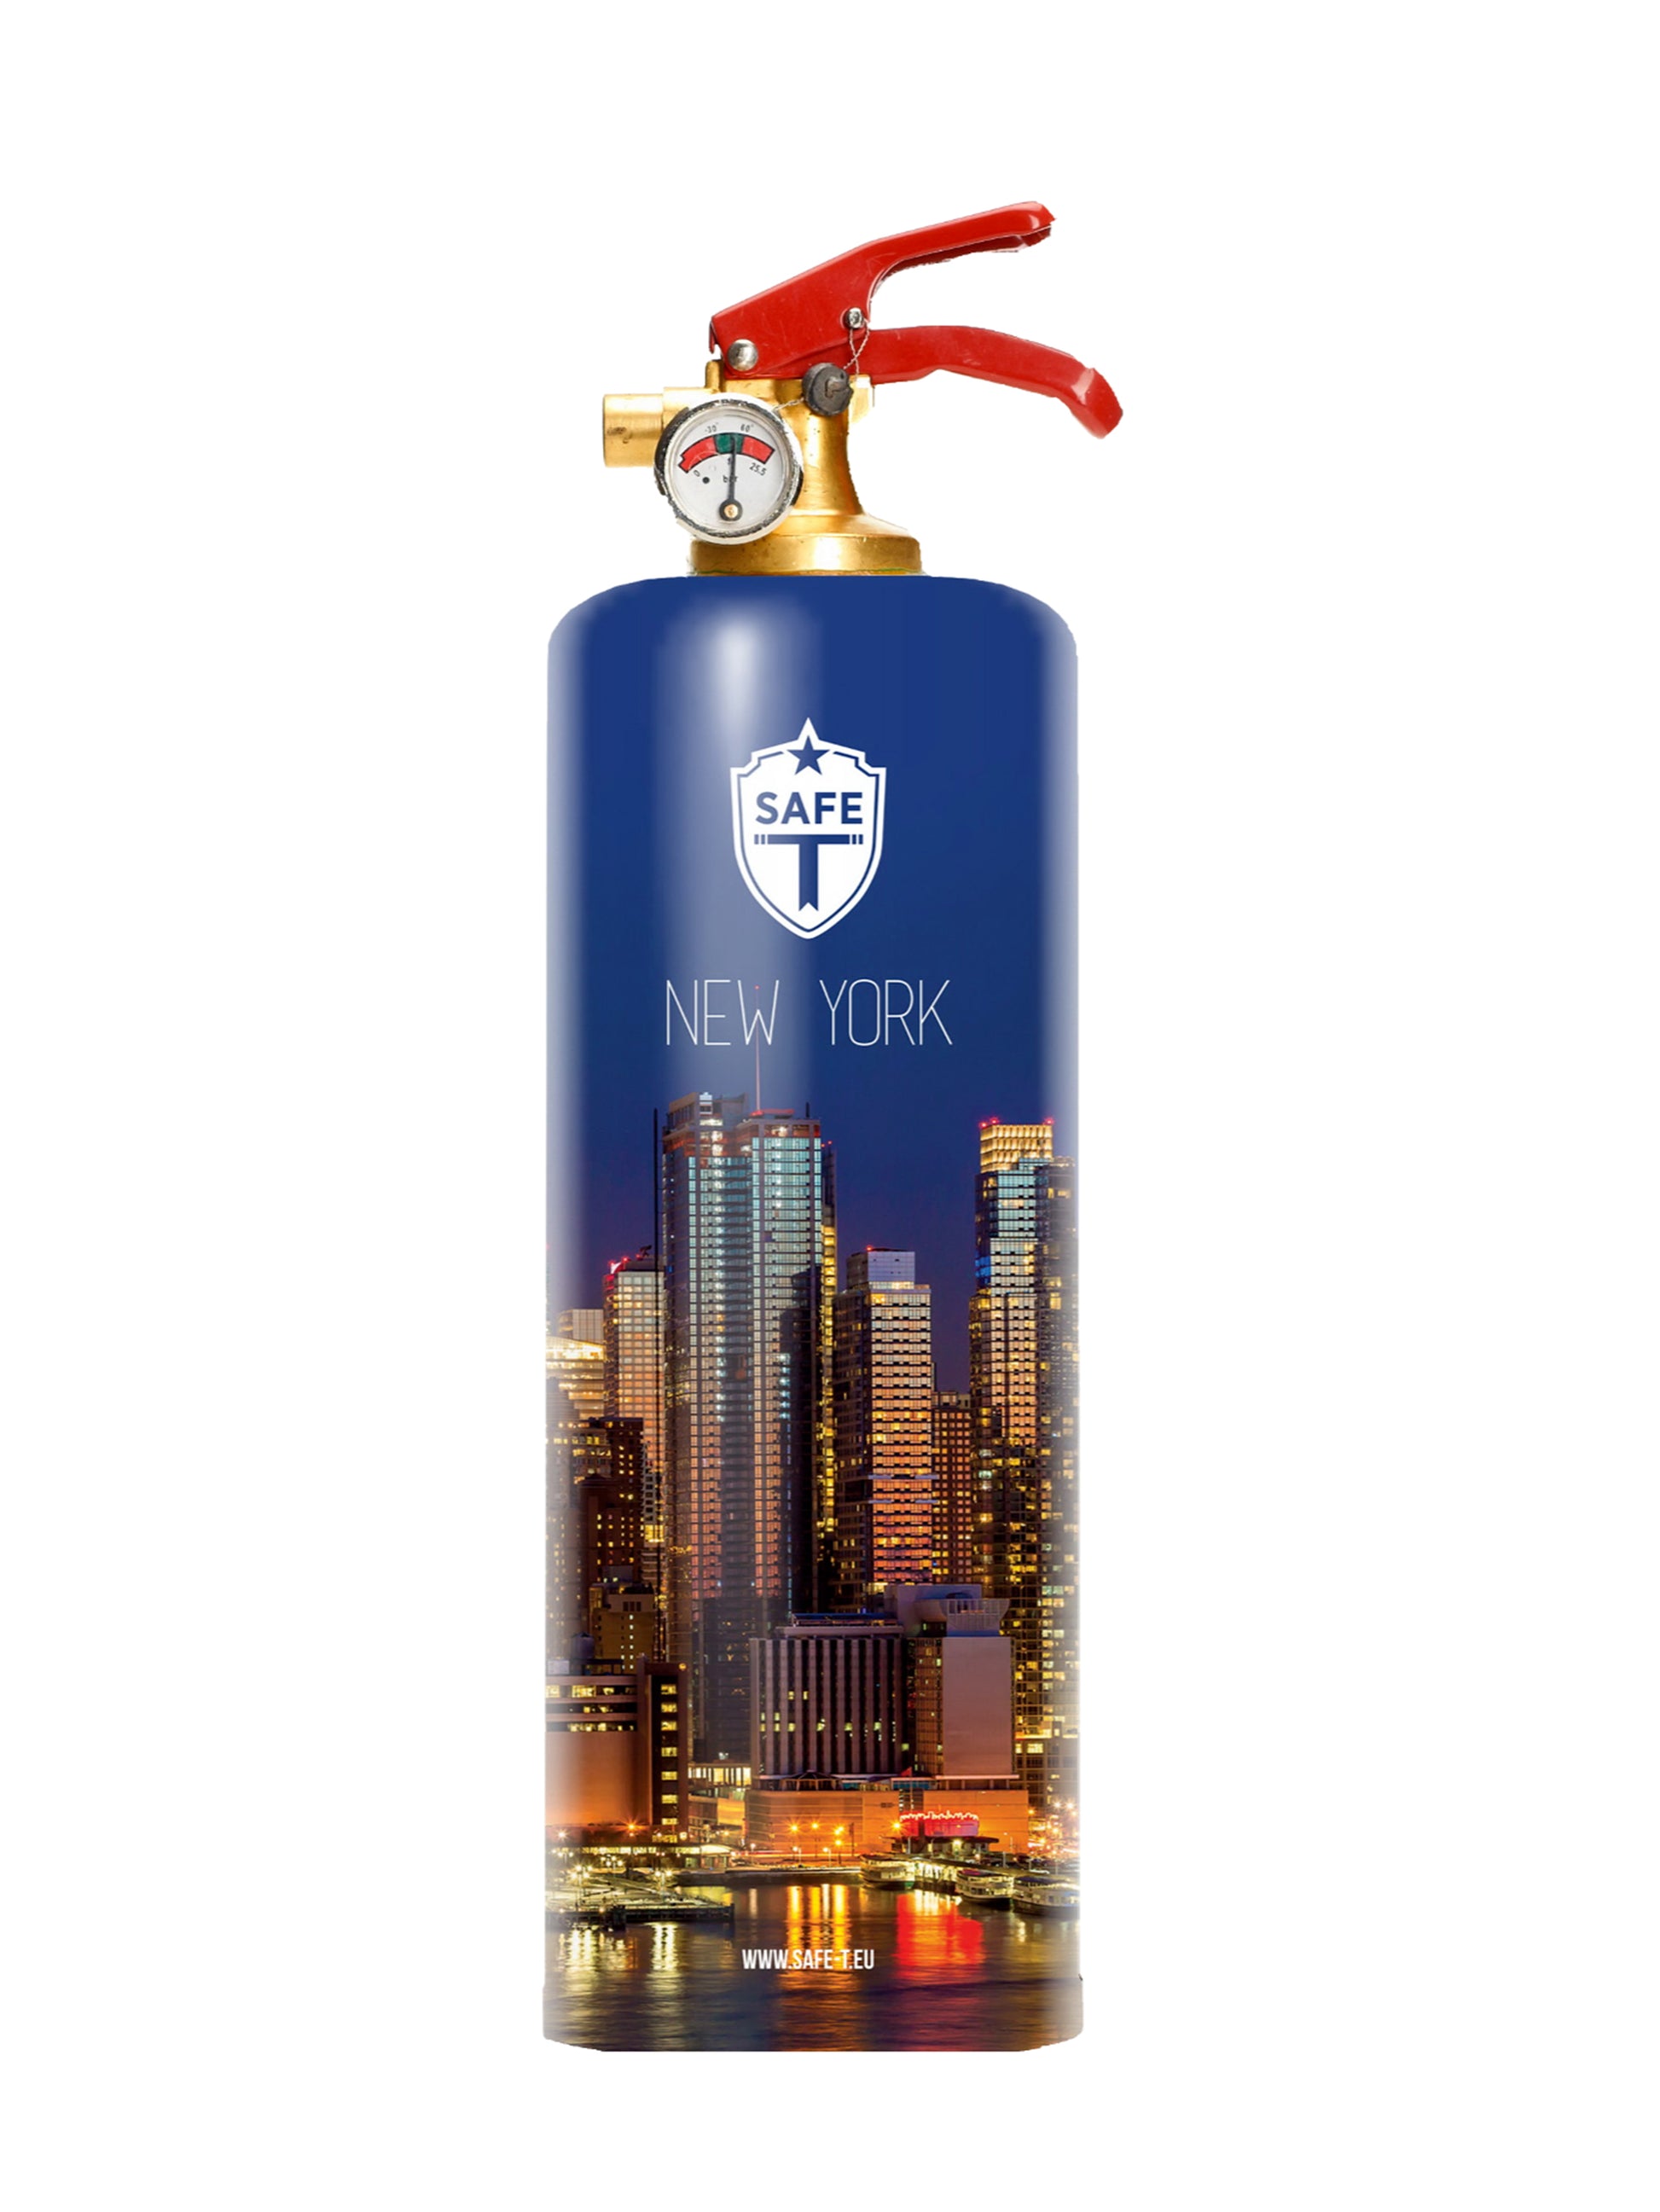 Safe-T Fire Extinguisher New York Weston Table